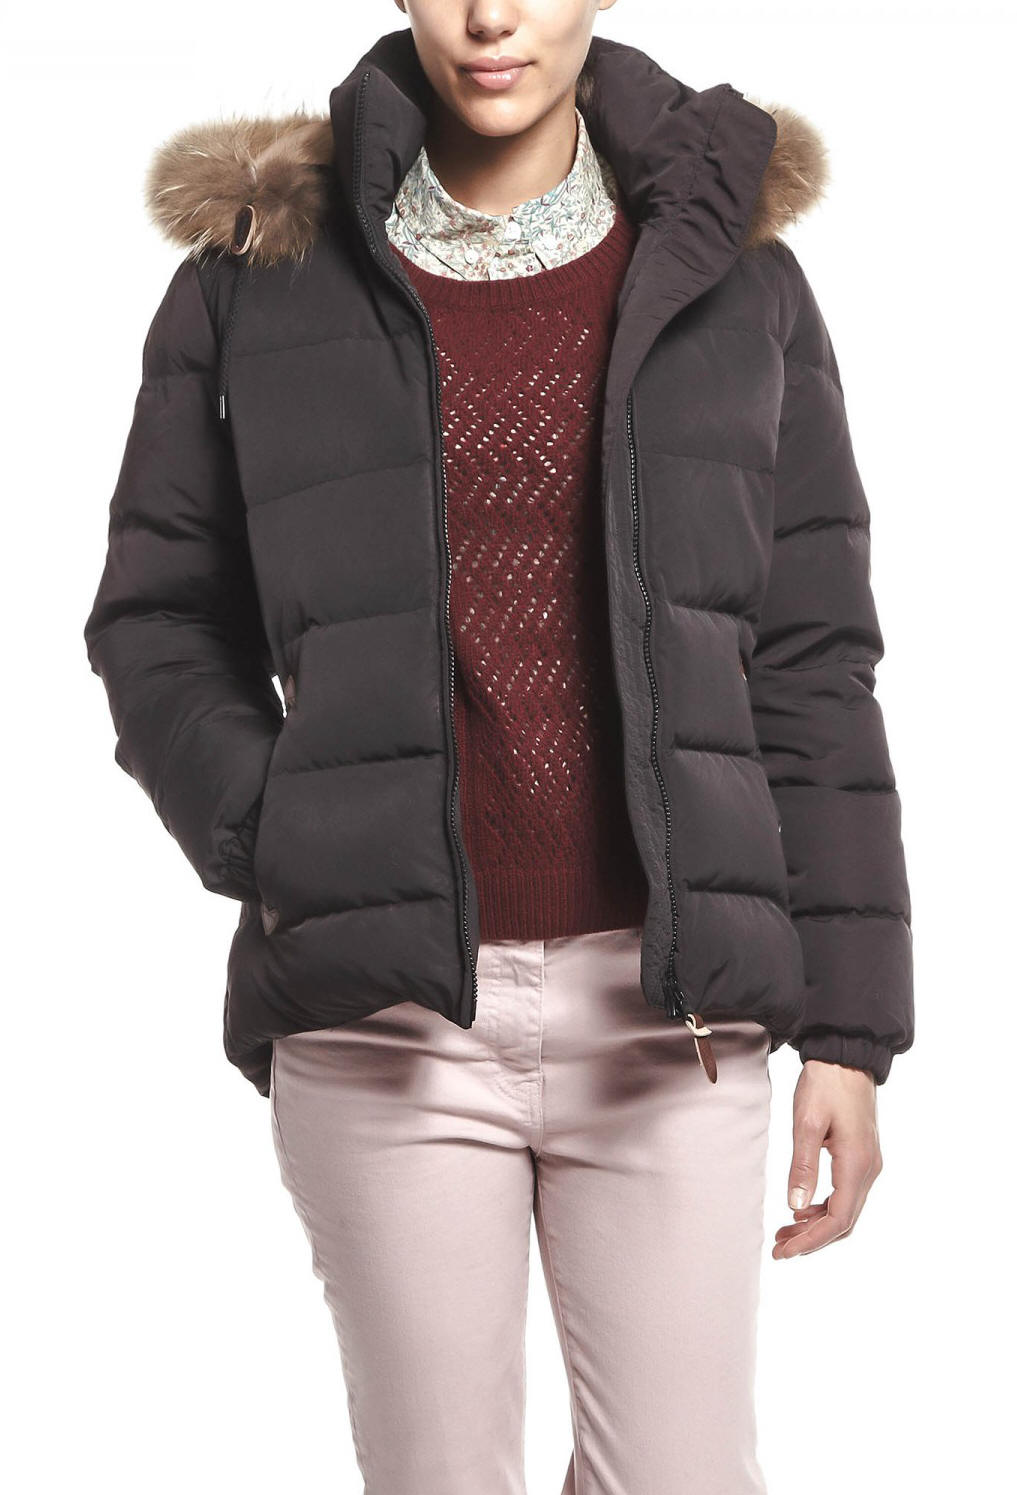 Precipice element buste Aigle Ladies Oldhaveny Jacket Ebene - Red Rae Town & Country